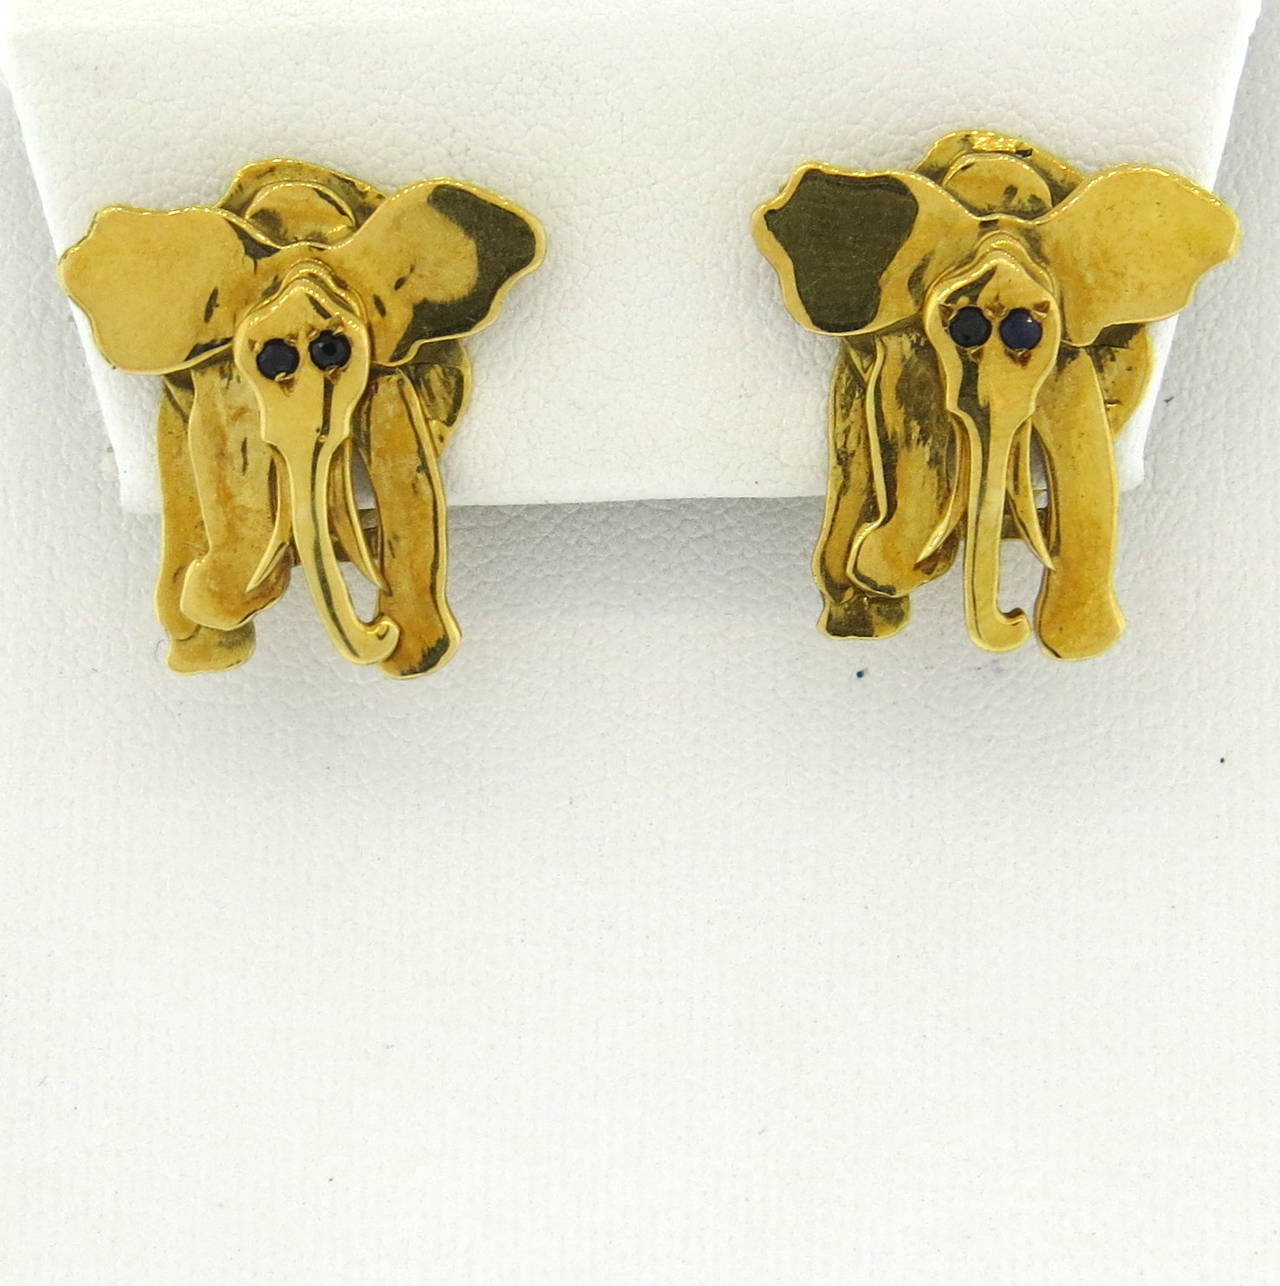 14k gold elephant earrings with sapphire eyes, by Mia Fonssagrives-Solow, measuring 21mm x 20mm. Marked MFS and 14k. weight - 13.1 grams